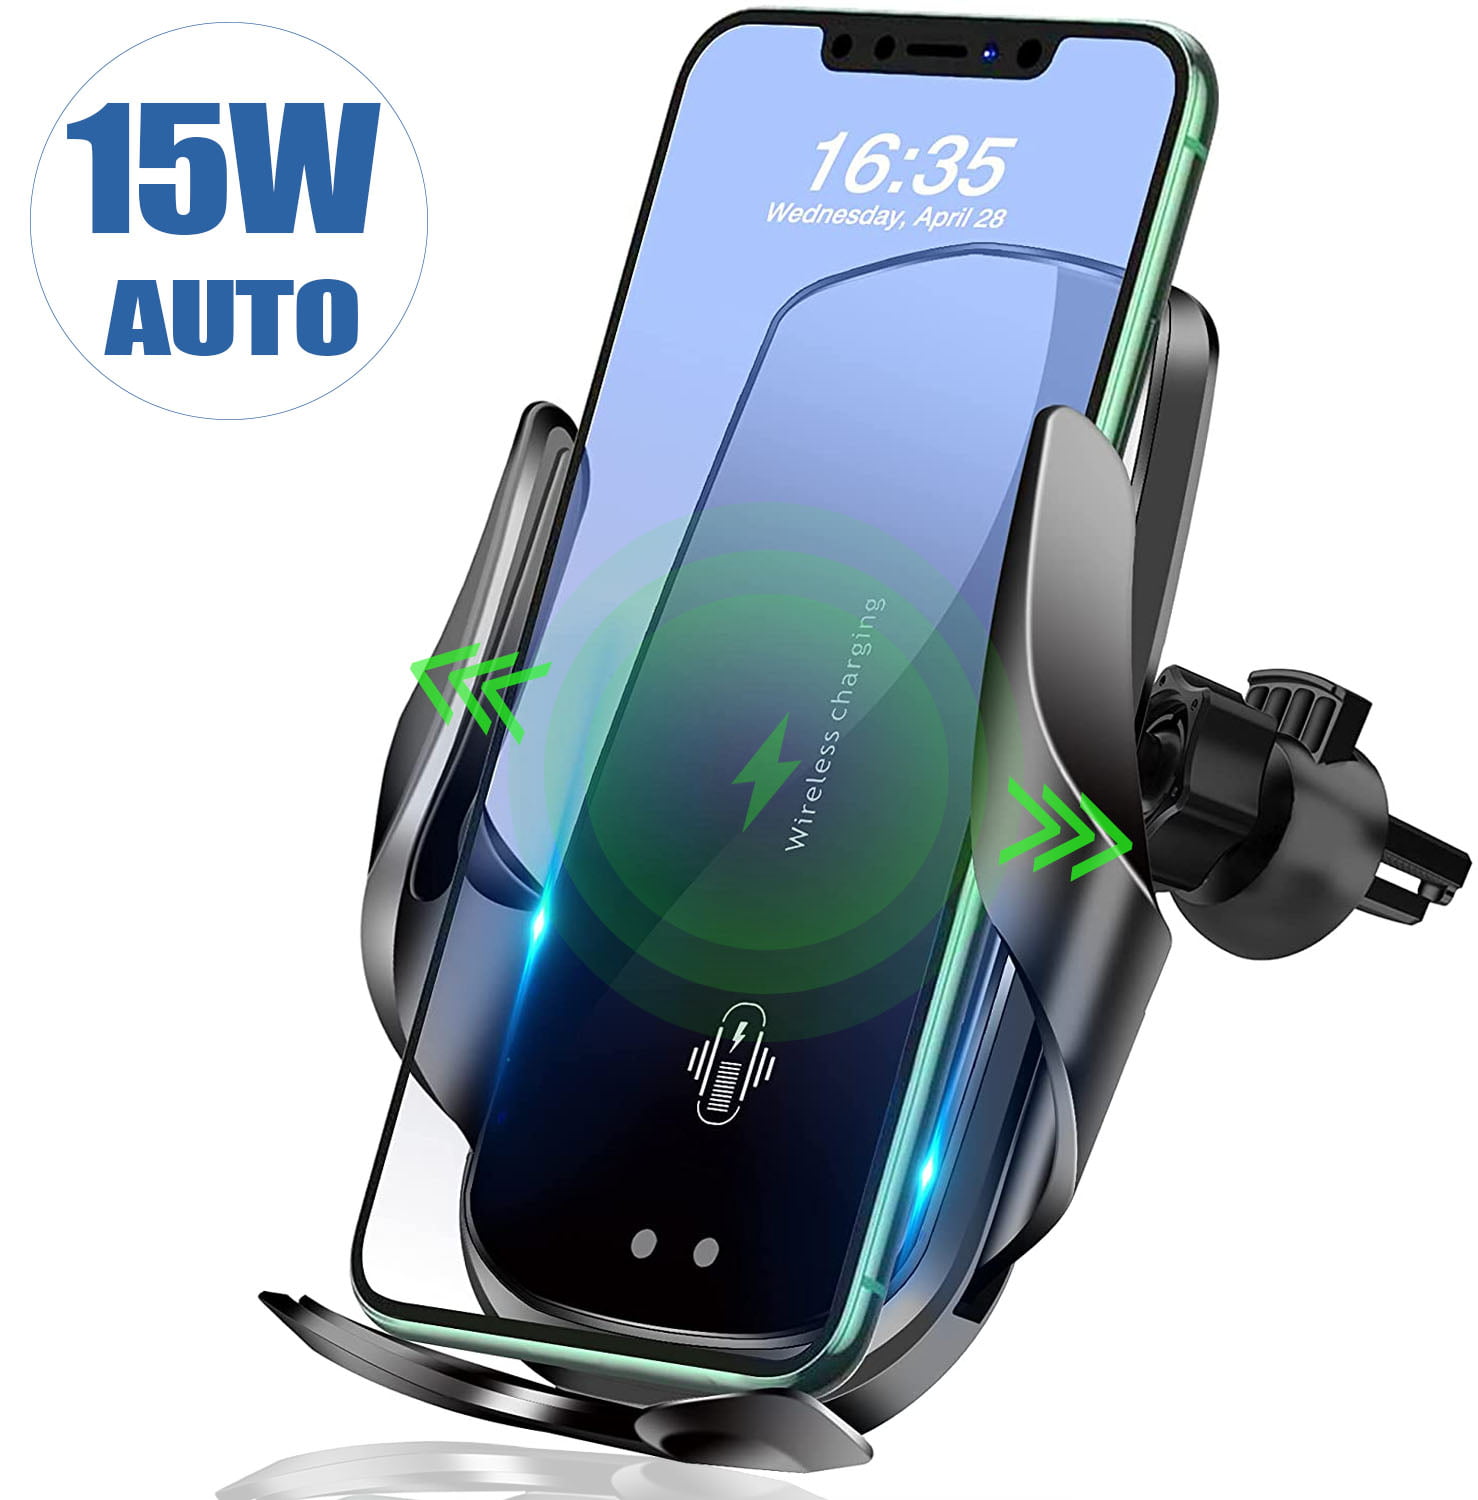 Wireless Car Charger Infrared Smart Sensor Phone Bracket Mount Lock by Screw 10W 7.5W Qi Fast Charging Automatic Clamping Fits Air Vent Compatible with iPhone 12/11/11 Pro/11 